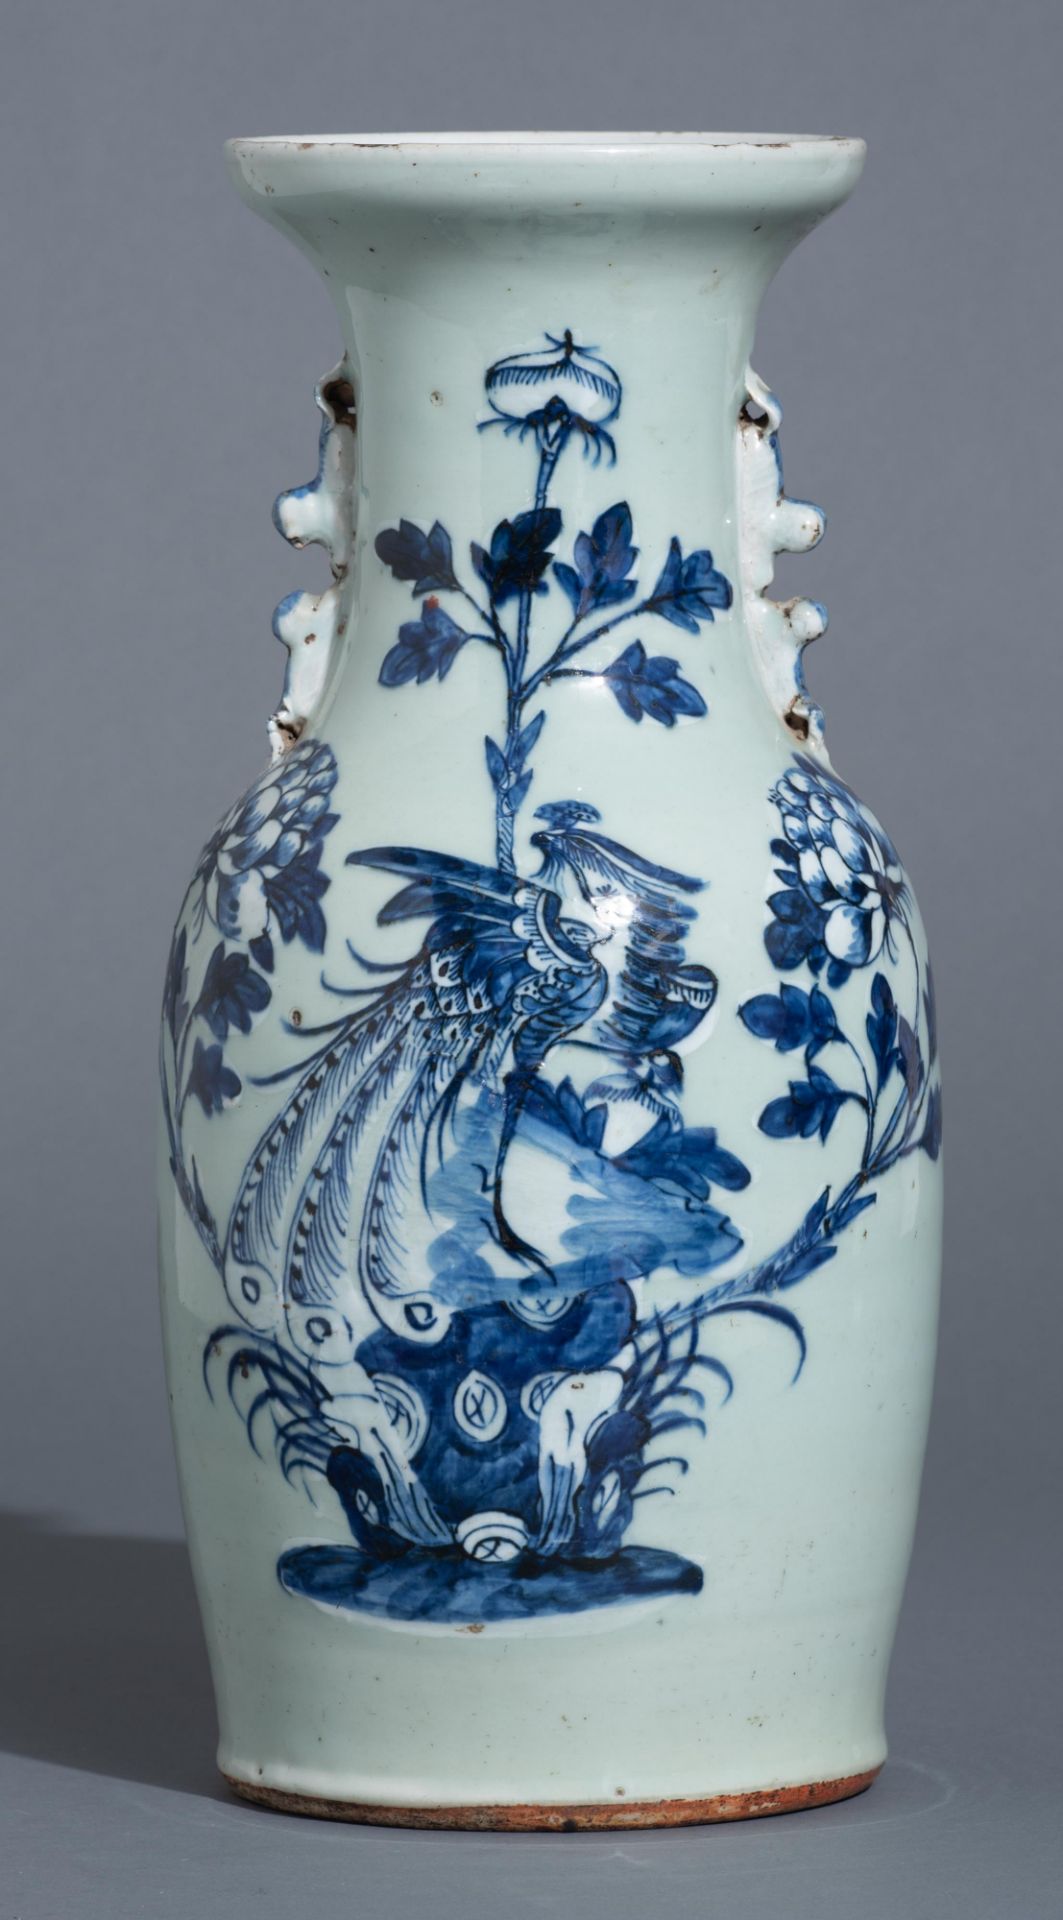 Four Chinese blue and white on celadon ground vases, late 19thC, H 42 - 43 cm - Image 8 of 52